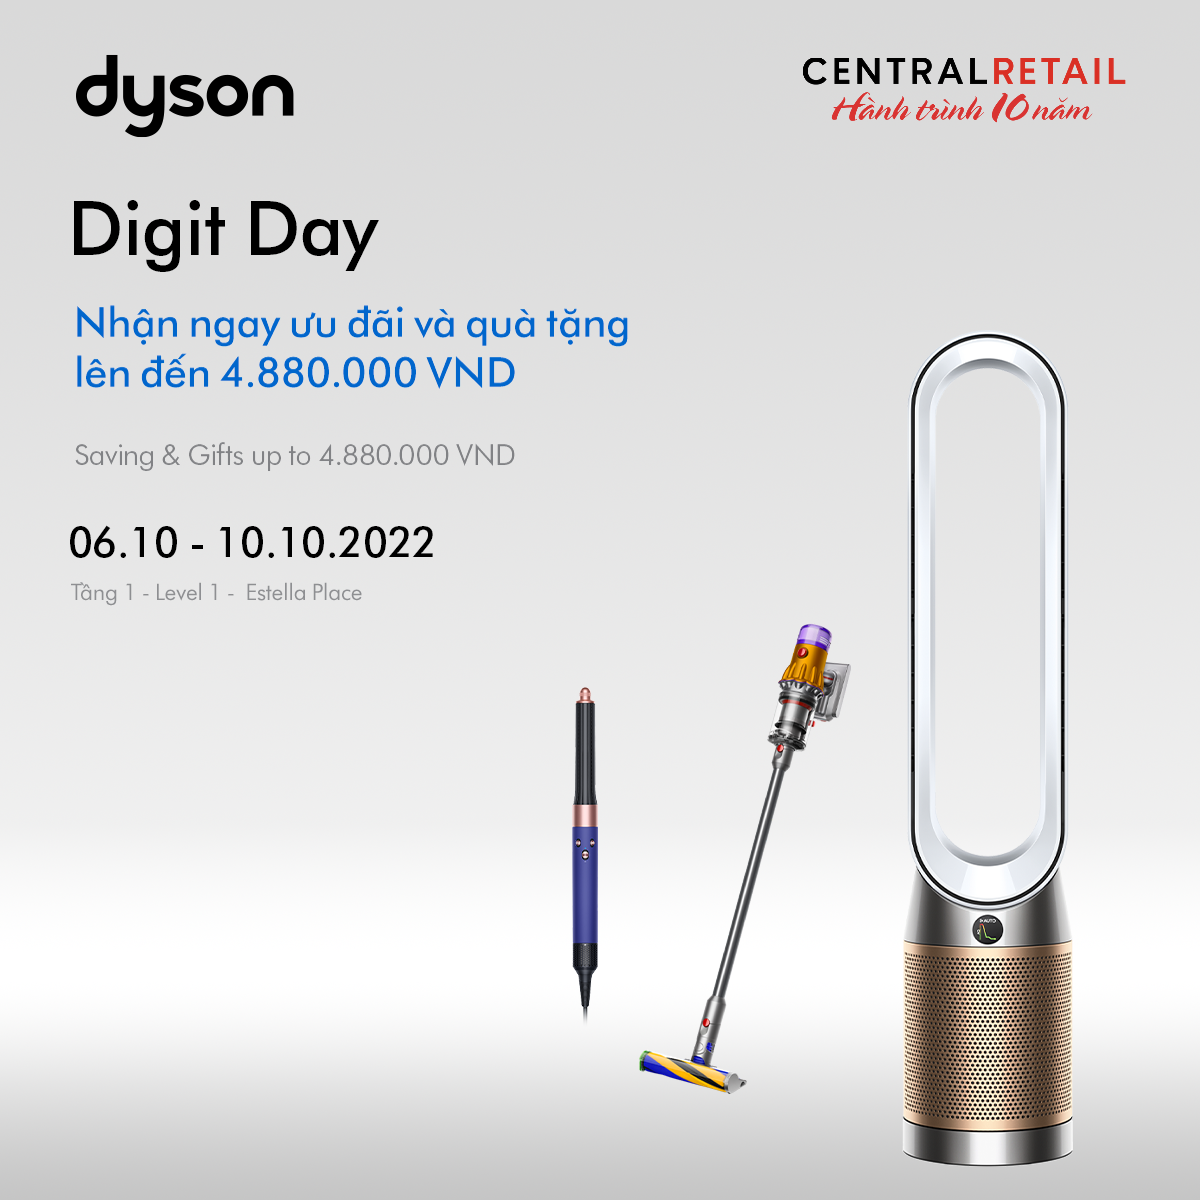 ⚡DIGIT DAY - OFFERS UP TO 4,880,000VND